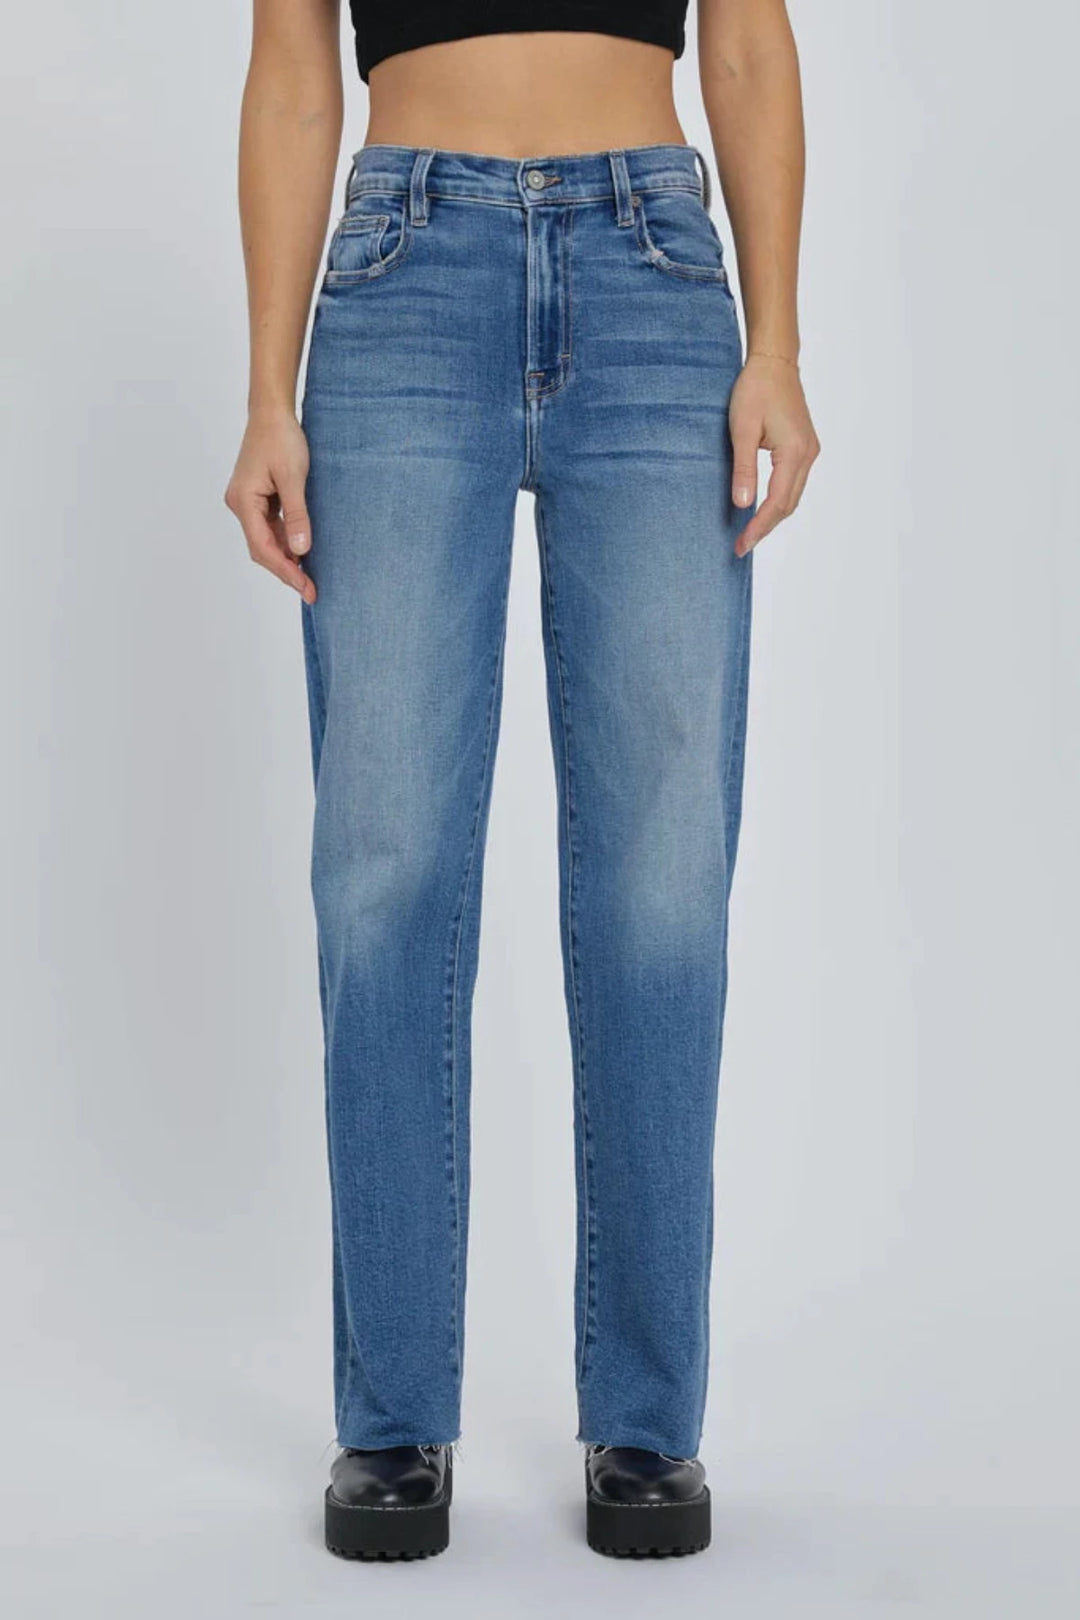 Want comfort AND style? The Hidden Jeans Logan High Waist Dad Jean is your match made in denim heaven. This high rise jean is perfect for giving your look that classic, timeless vibe. The zipper fly and raw hem make it easy to look good with minimal effort - yessir!